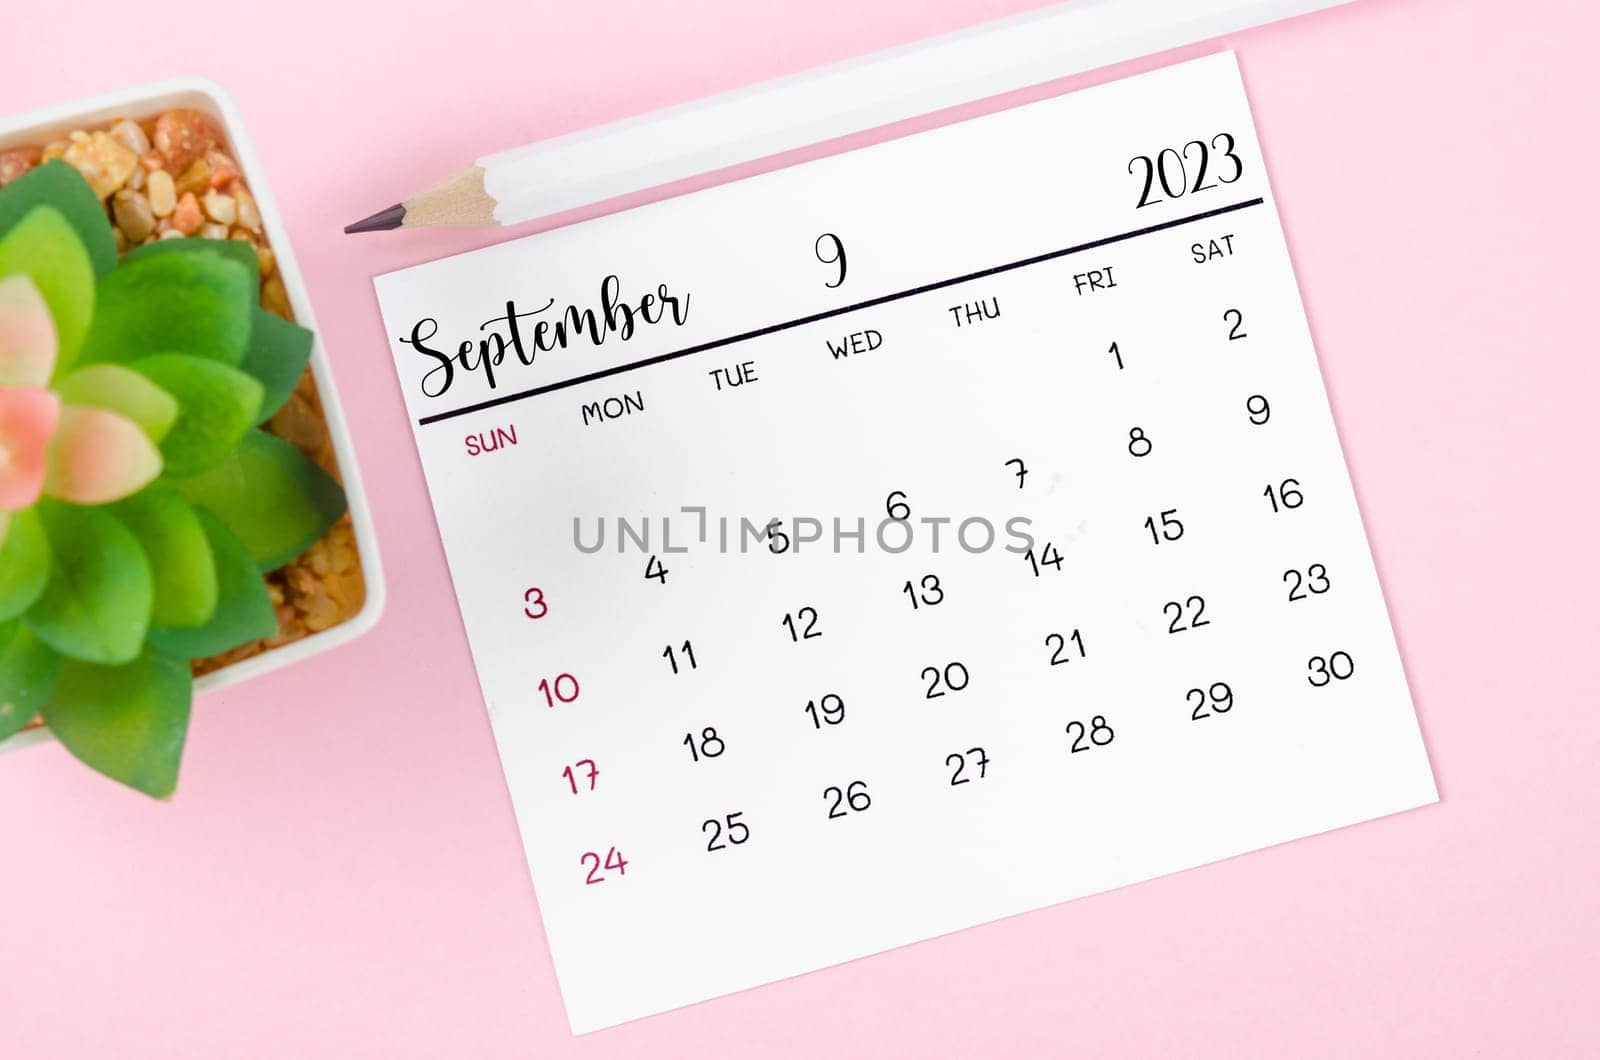 September 2023 Monthly calendar for 2023 year on pink background.